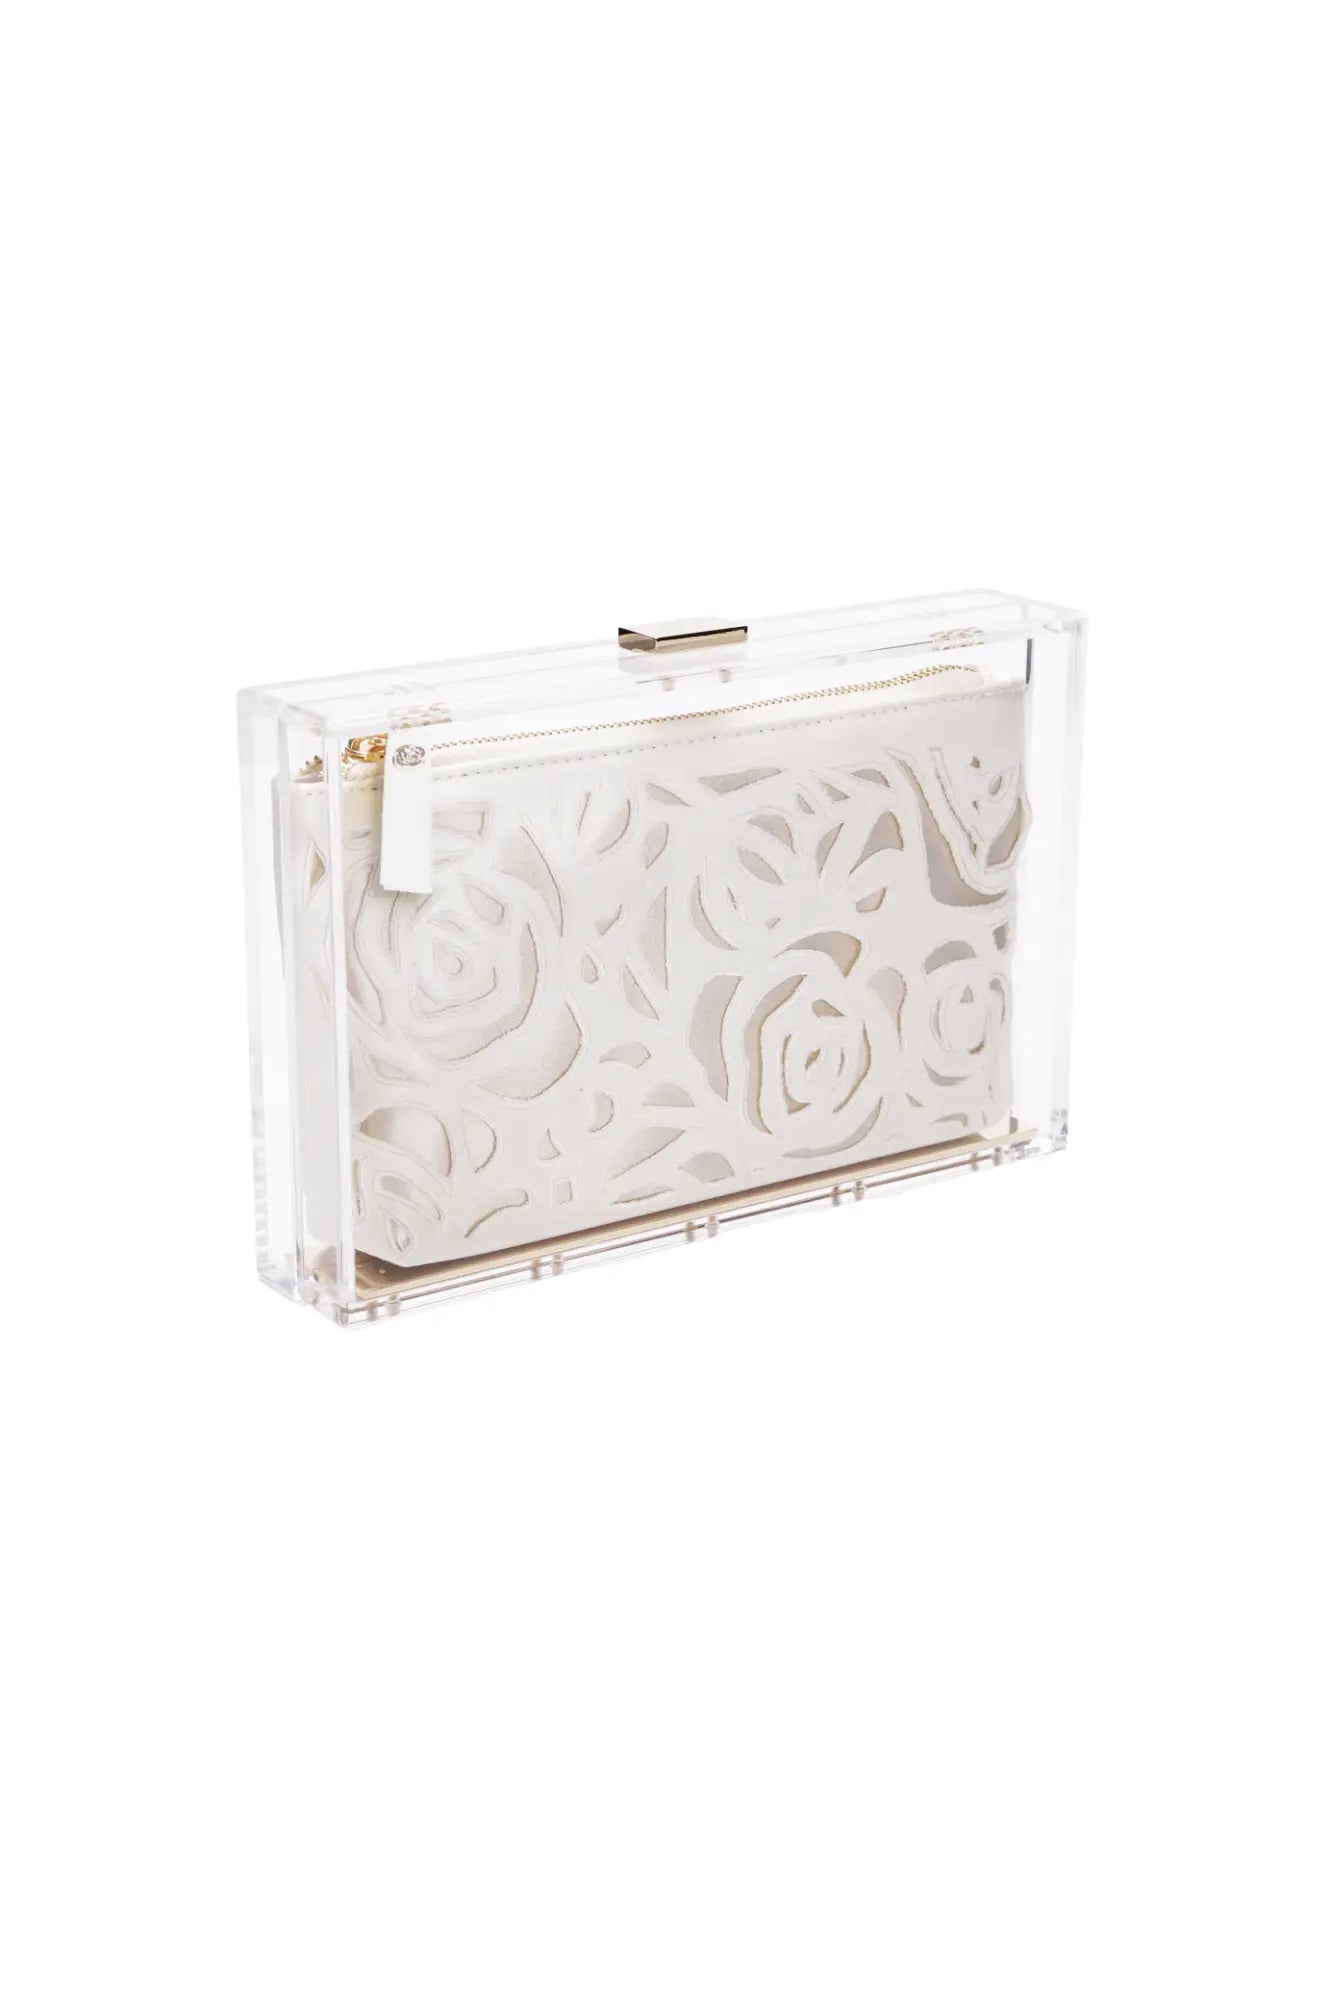 Clear Italian Mia Acrylic Clutch with Ivory Laser Cut Rose, from The Bella Rosa Collection.